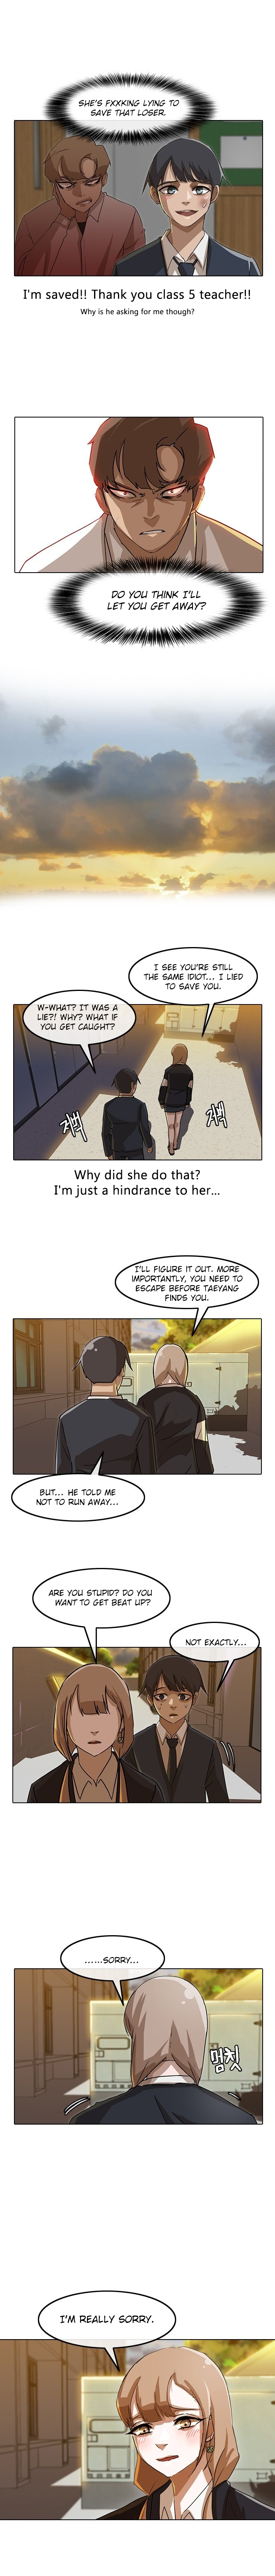 The Girl from Random Chatting! Vol. 2 Ch. 20 What Happened?